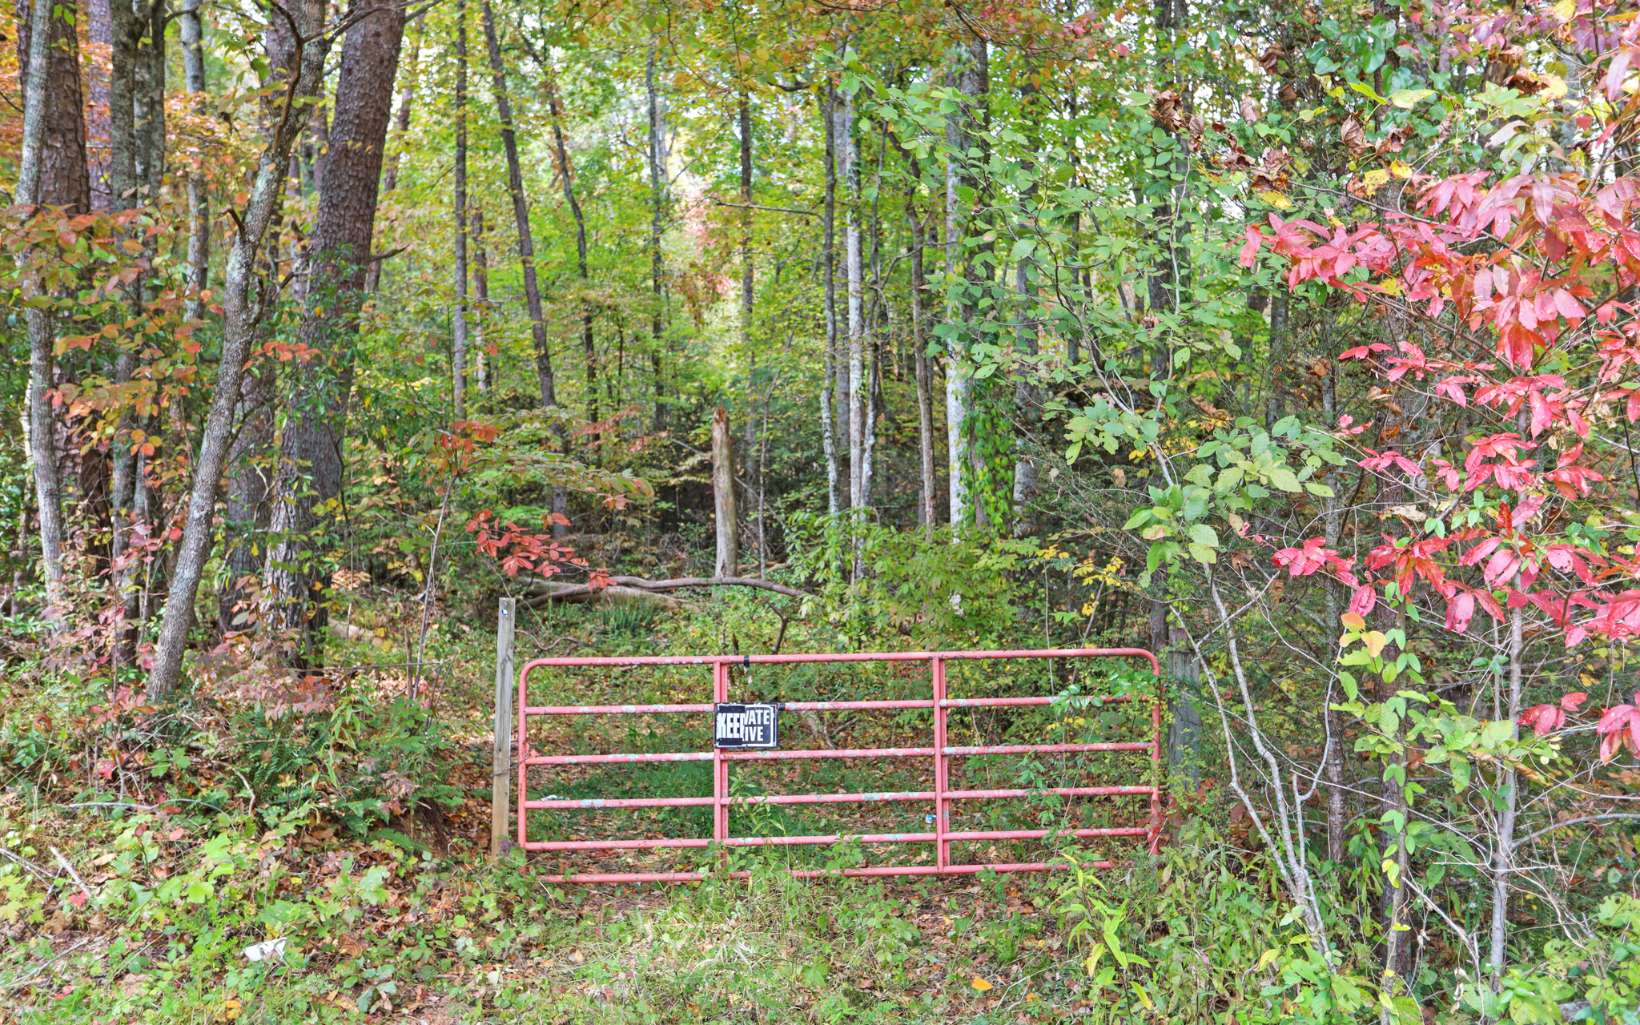 UNRESETRICTED ACREAGE, with the exception of 1 acre. NO HOA. You are able to have 2 entrances, one from Macedonia Church Road or one thru Mill Acres SD. This property has an array of different possibilities. Use as your family compound, Private Estate or Sub Divide. The location is very accessible to Downtown Blue Ridge as well as McCaysville, horseback riding, Hunting in the National Forest, Fishing in the Toccoa River. Uses are unlimited, just use your imagination. Covered in hard woods and also offers a small spring. Property is in the Conservation Program for a reduction in your county taxes. Recorded Easement to the property. New Survey is available.